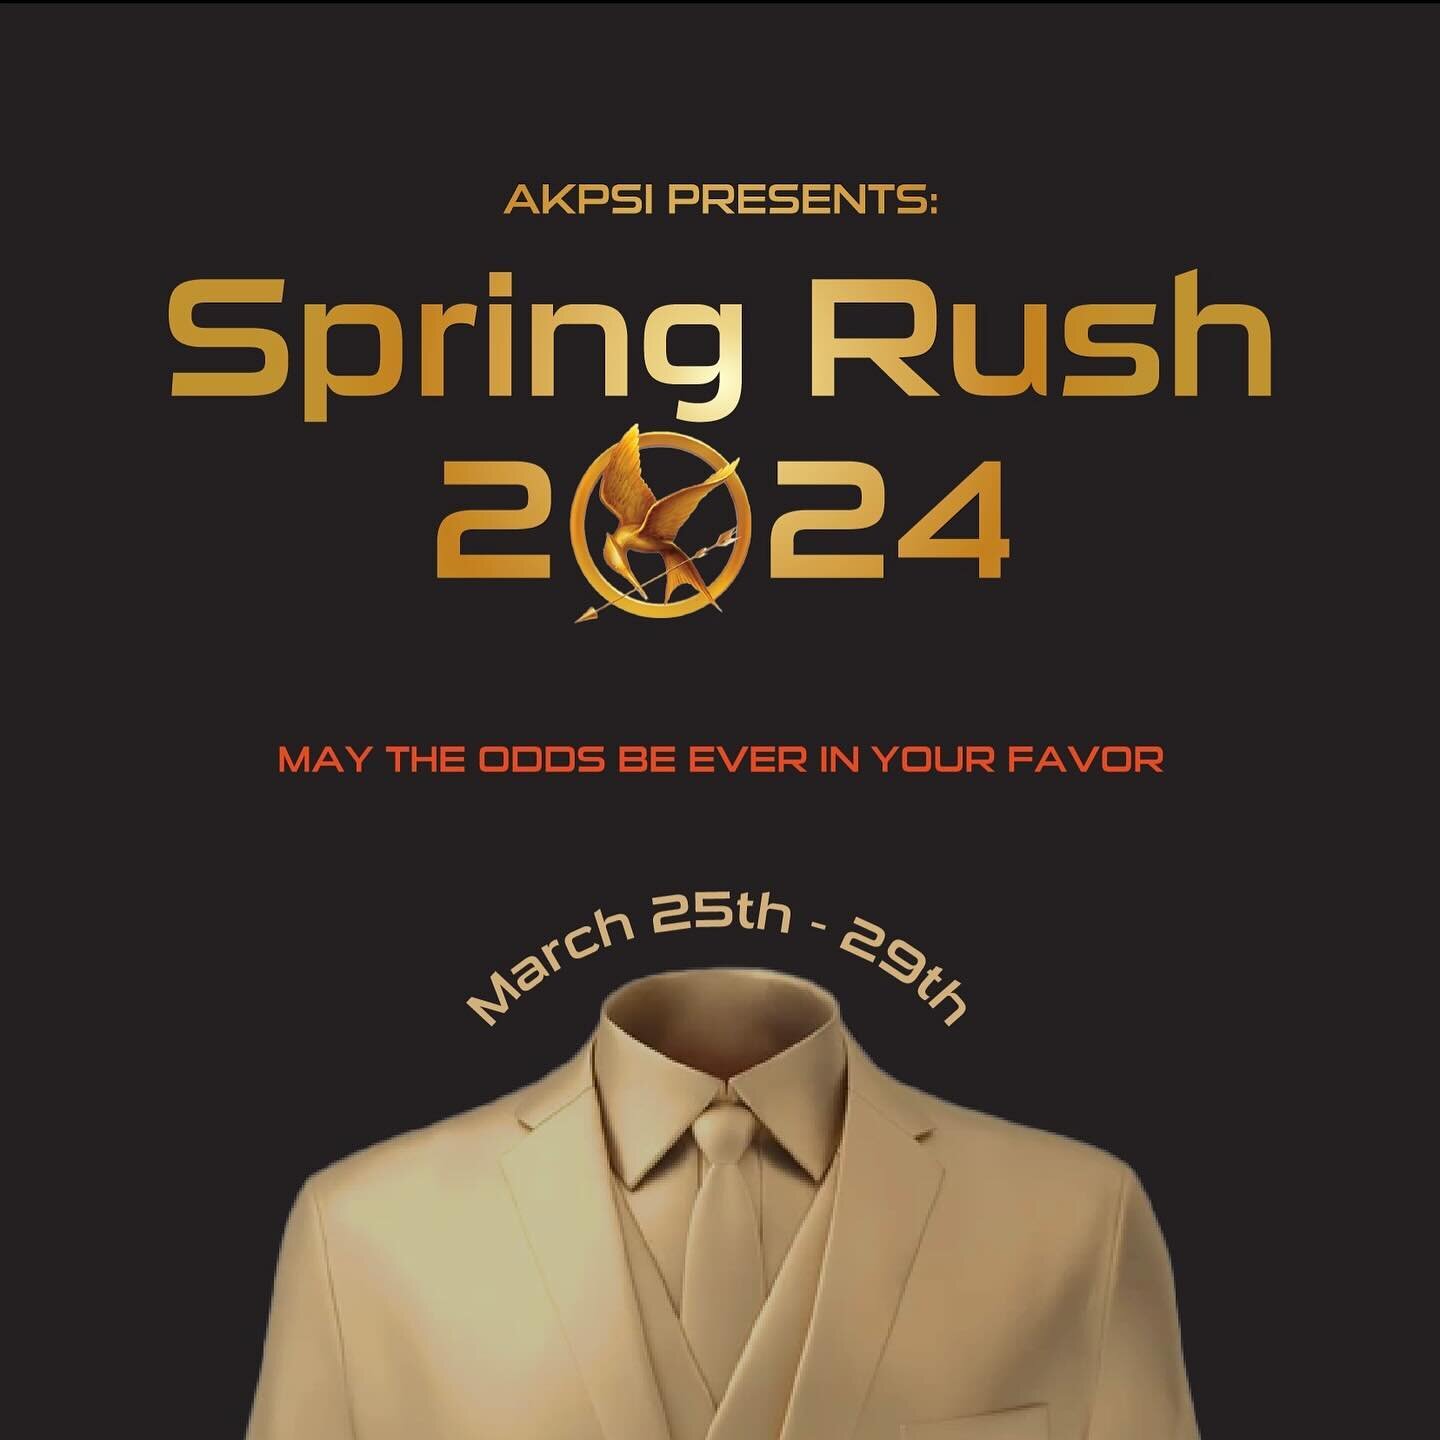 Attention all tributes🏹 AKPsi is excited to announce AKPsi: Hunger Games, our Spring 2024 Recruitment Cycle! 

If you are interested in a career in business or want to join an amazing community on campus, come to our recruitment events all throughou